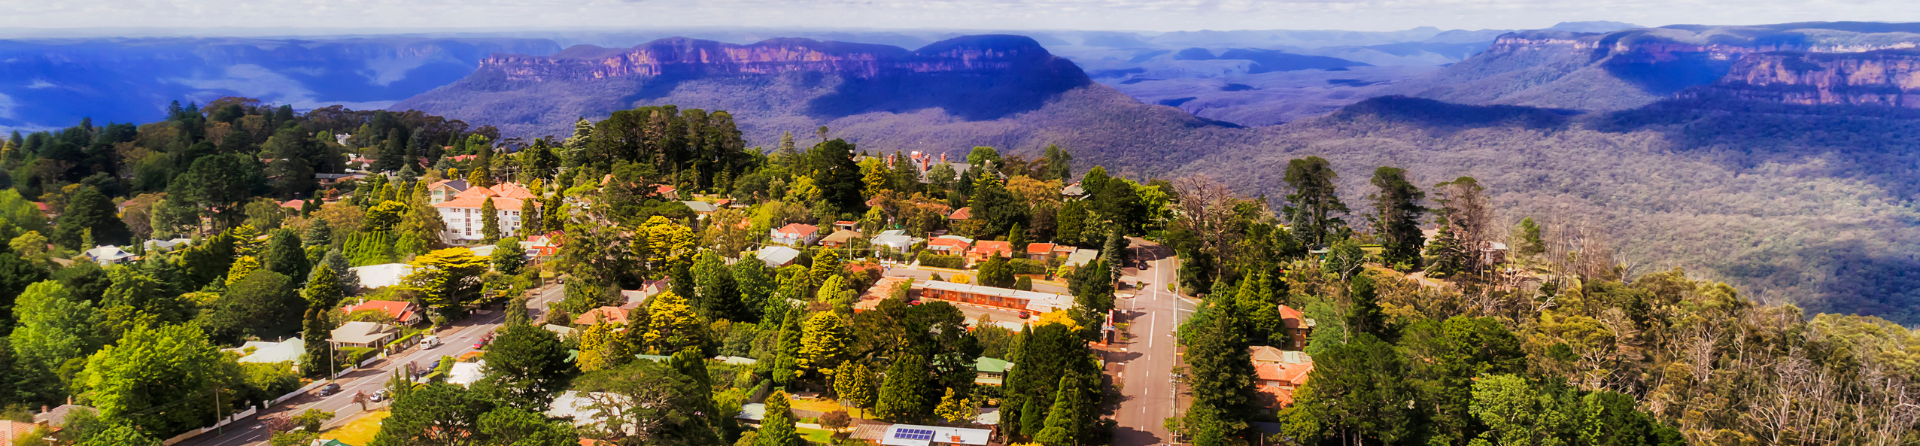 What is Katoomba known for?